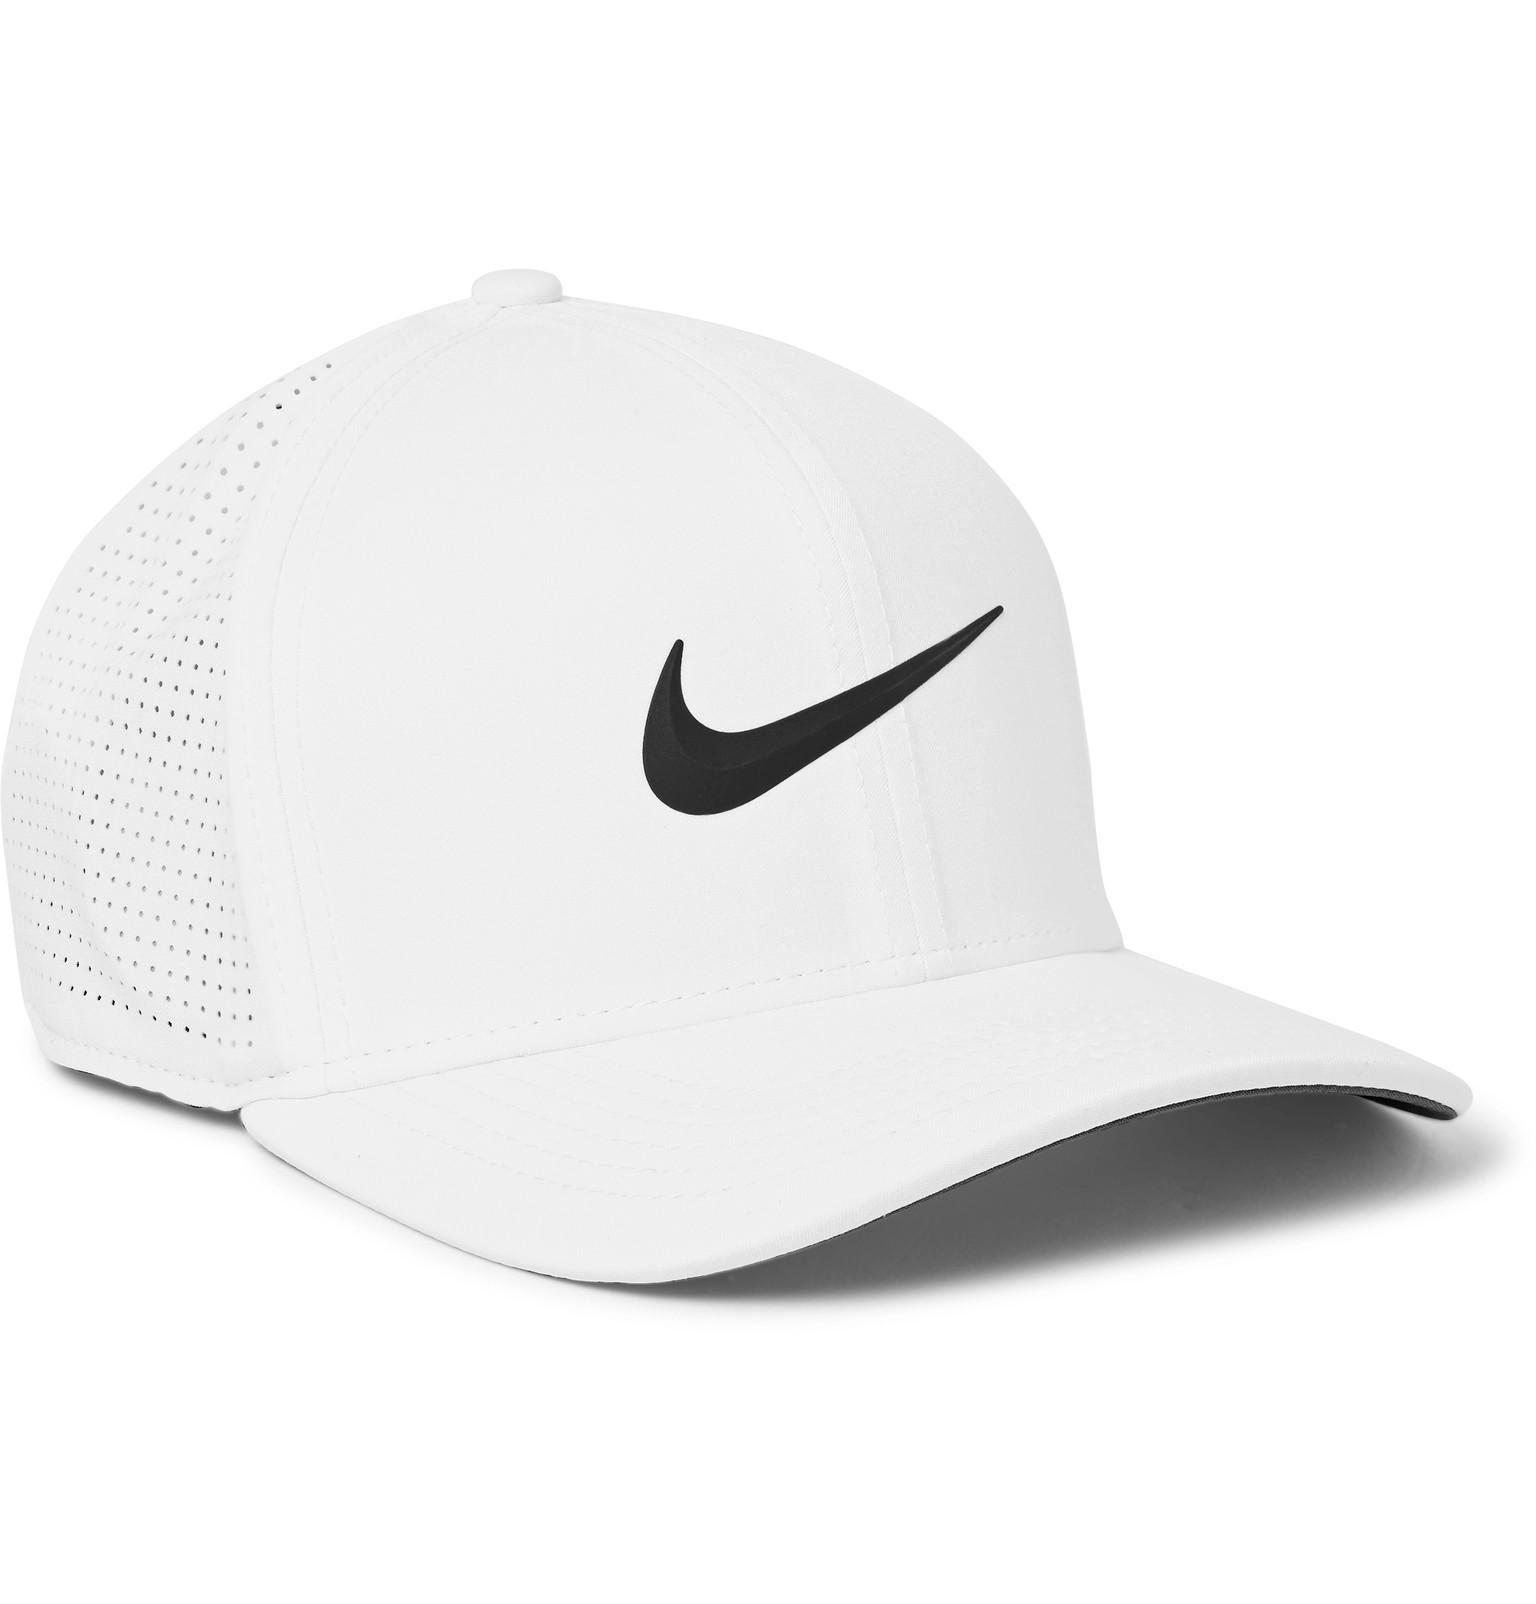 Nike Aerobill Classic 99 Perforated Dri-fit Golf Cap In White For Men ...